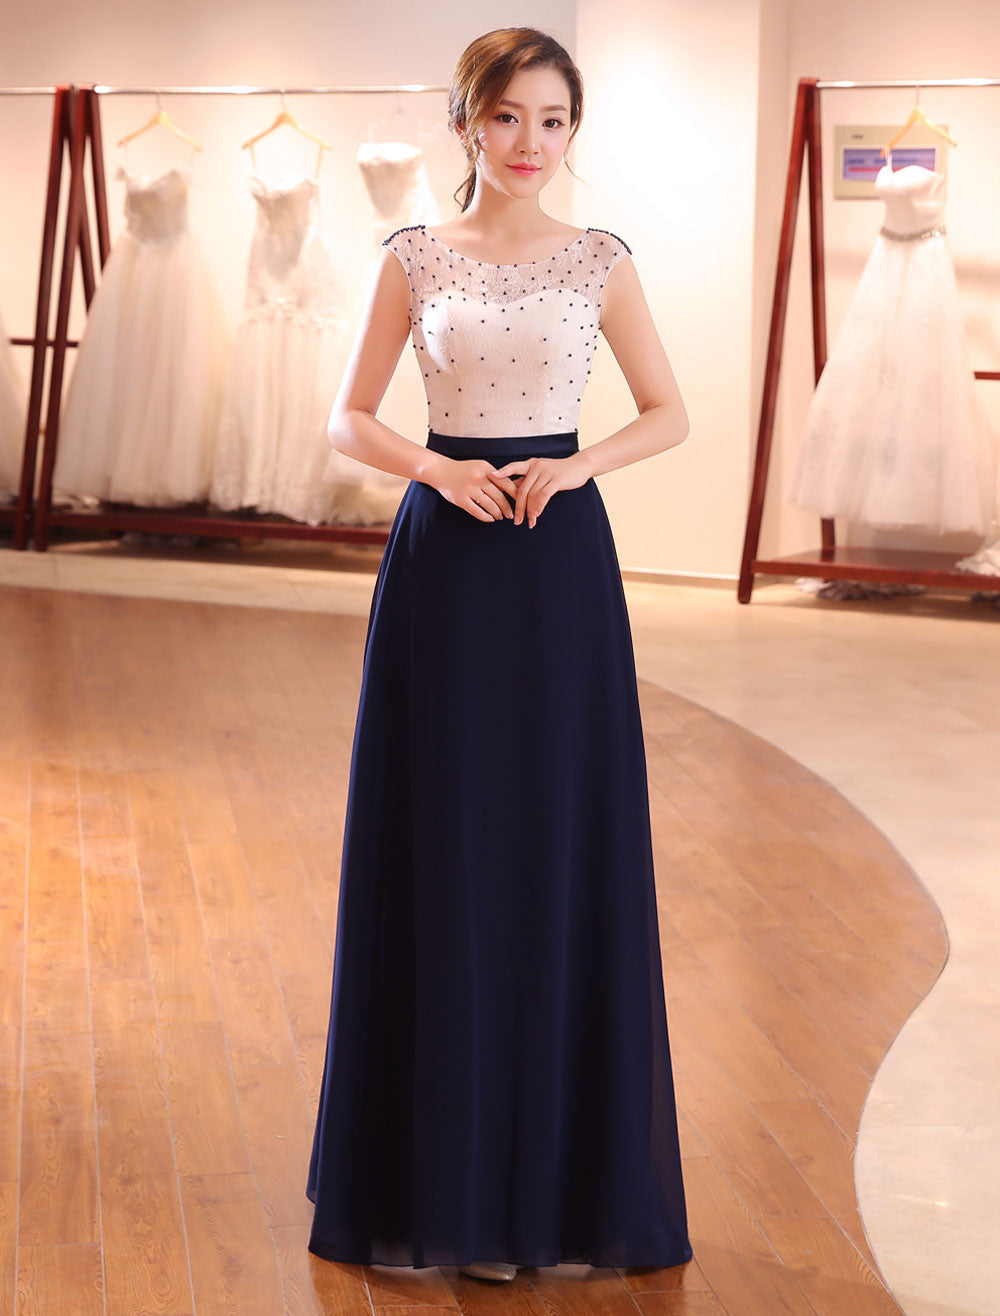 Gorgeous Evening Dresses Dark Navy Lace Formal Dress Illusion Beaded Contrast Color Floor Length Wedding Guest Dress